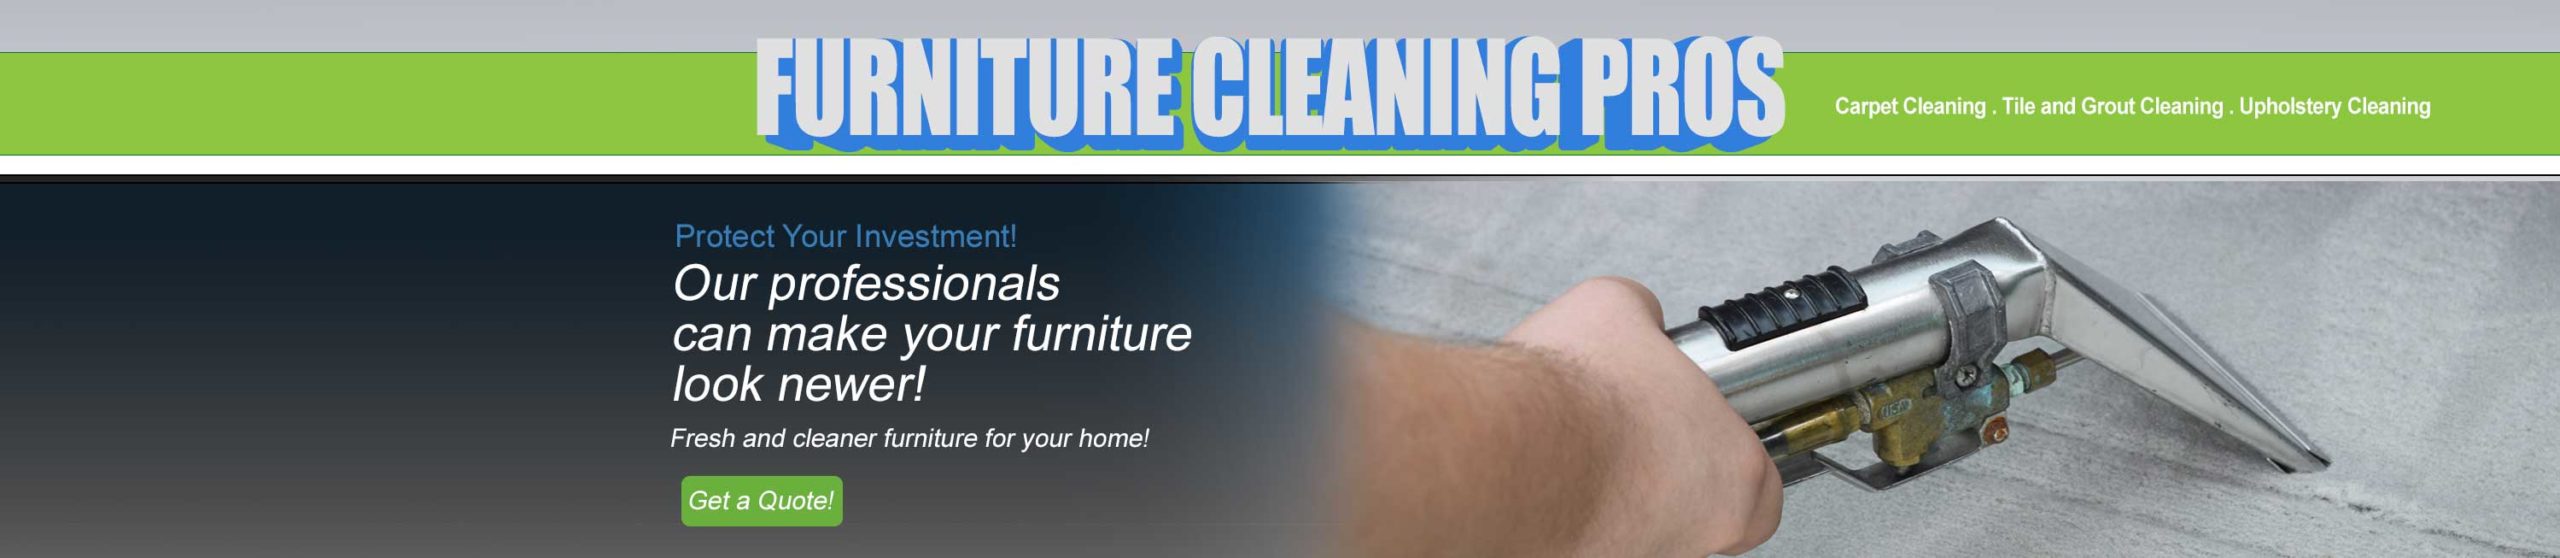 Furniture and upholstery cleaning in Avondale AZ